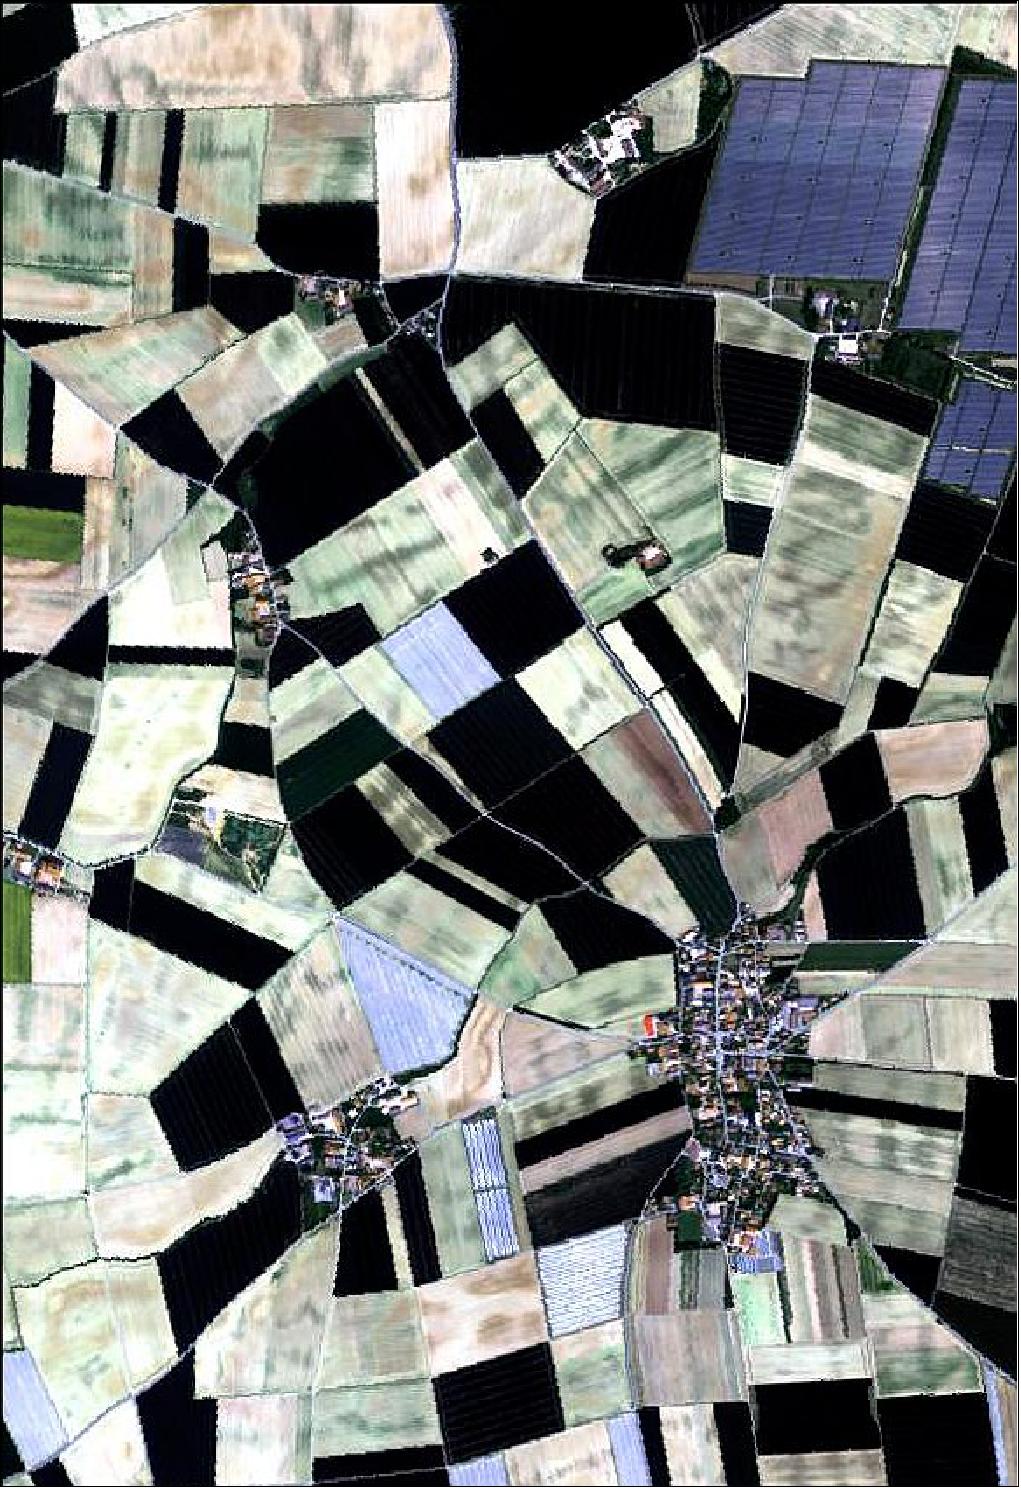 Figure 1: The campaign involved bringing an aircraft and JPL’s measuring instrument from the USA to the Dübendorf airbase near Zurich in Switzerland. The Next Generation Airborne Visible Infrared Imaging Spectrometer, AVIRIS, instrument resembles the capabilities that CHIME will have once in orbit. Captured by AVIRIS, the image shows agricultural fields in Irlbach, Germany (image credit: NASA/JPL)